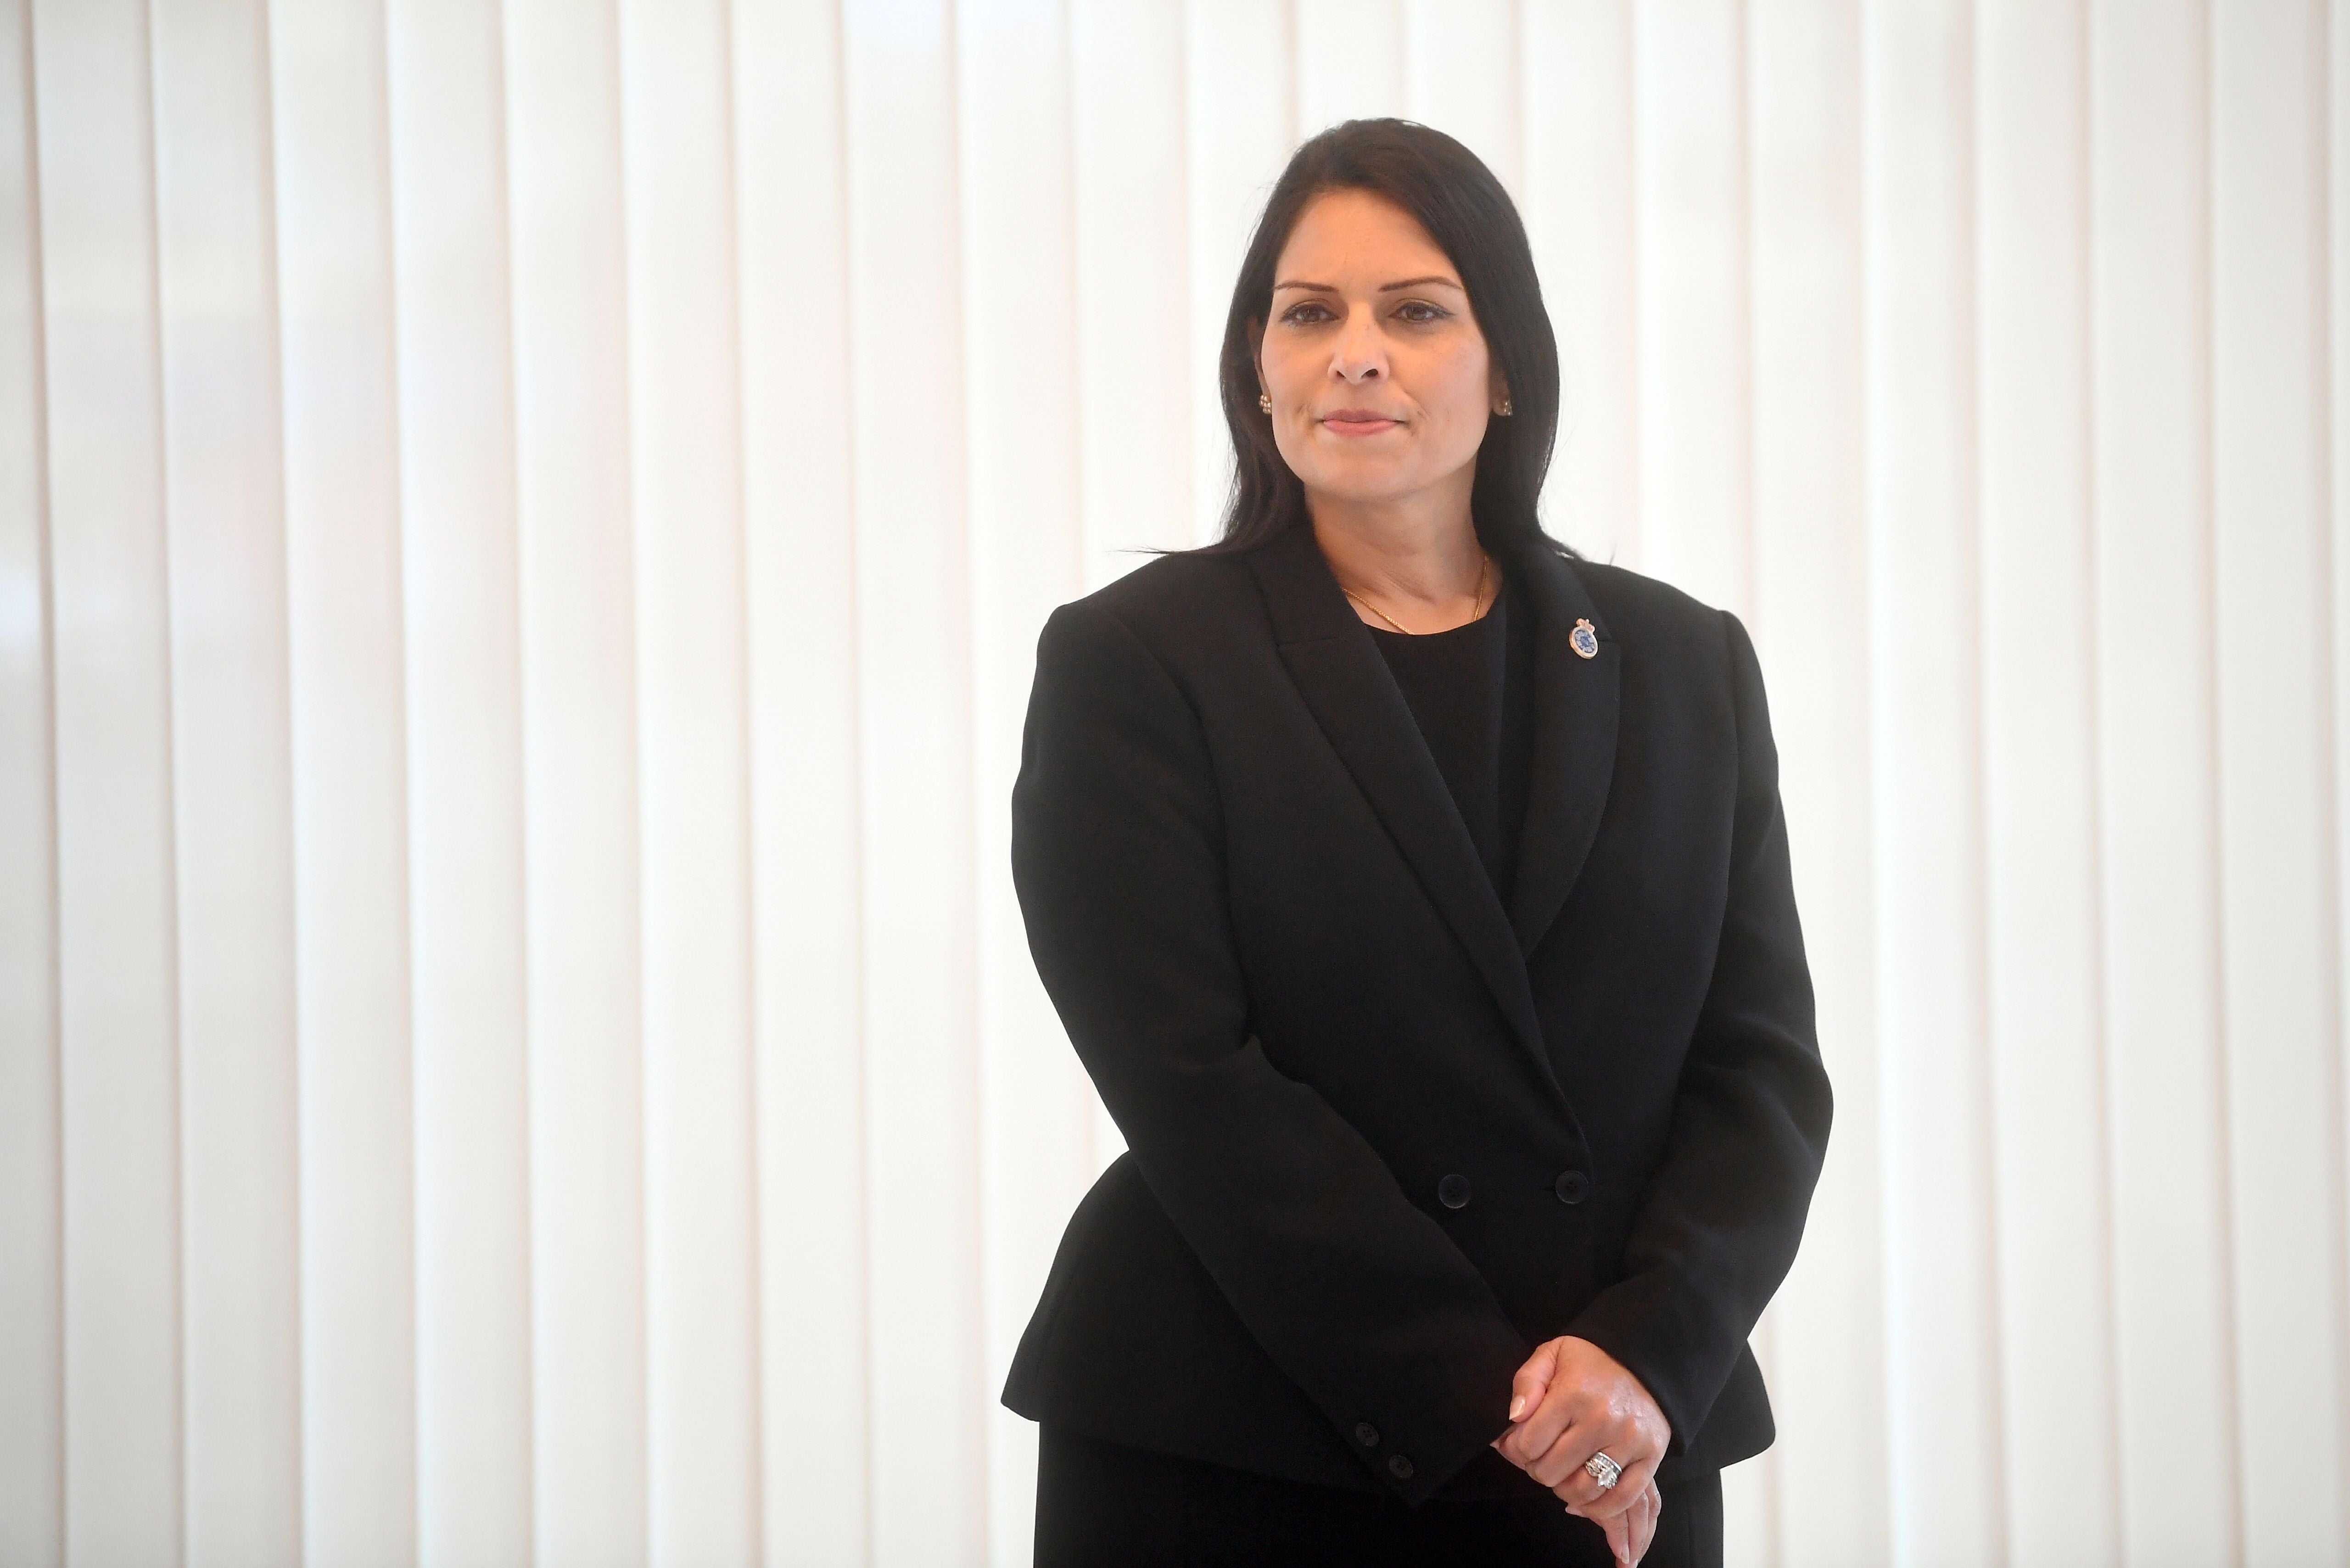 Priti Patel looks on ahead of a minute’s silence inside the atrium at Scotland Yard in London on 25 September 2020